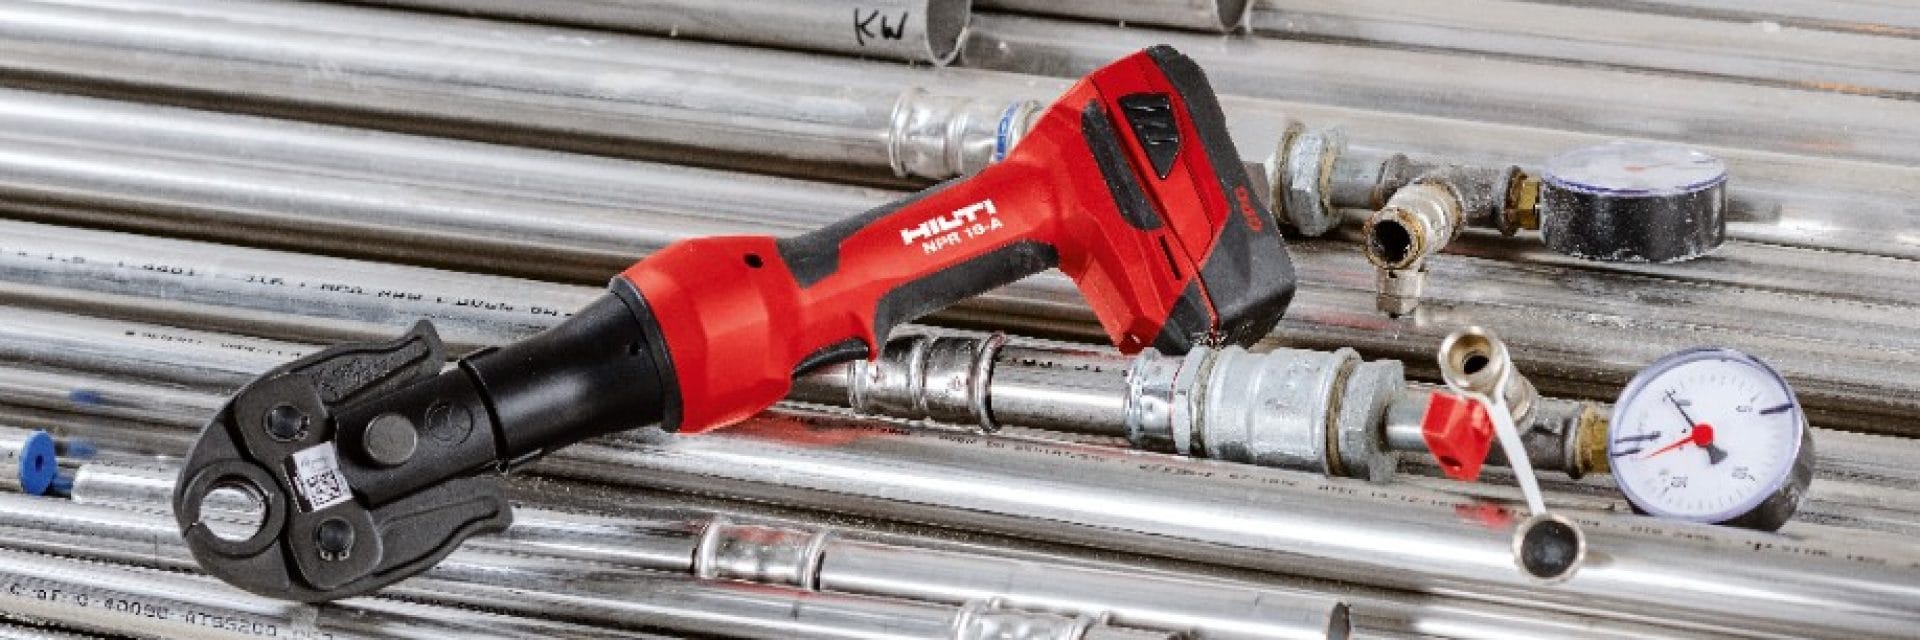 NPR 19-A cordless pipe press tool with batteries powerd by Cordless Power Care Technology